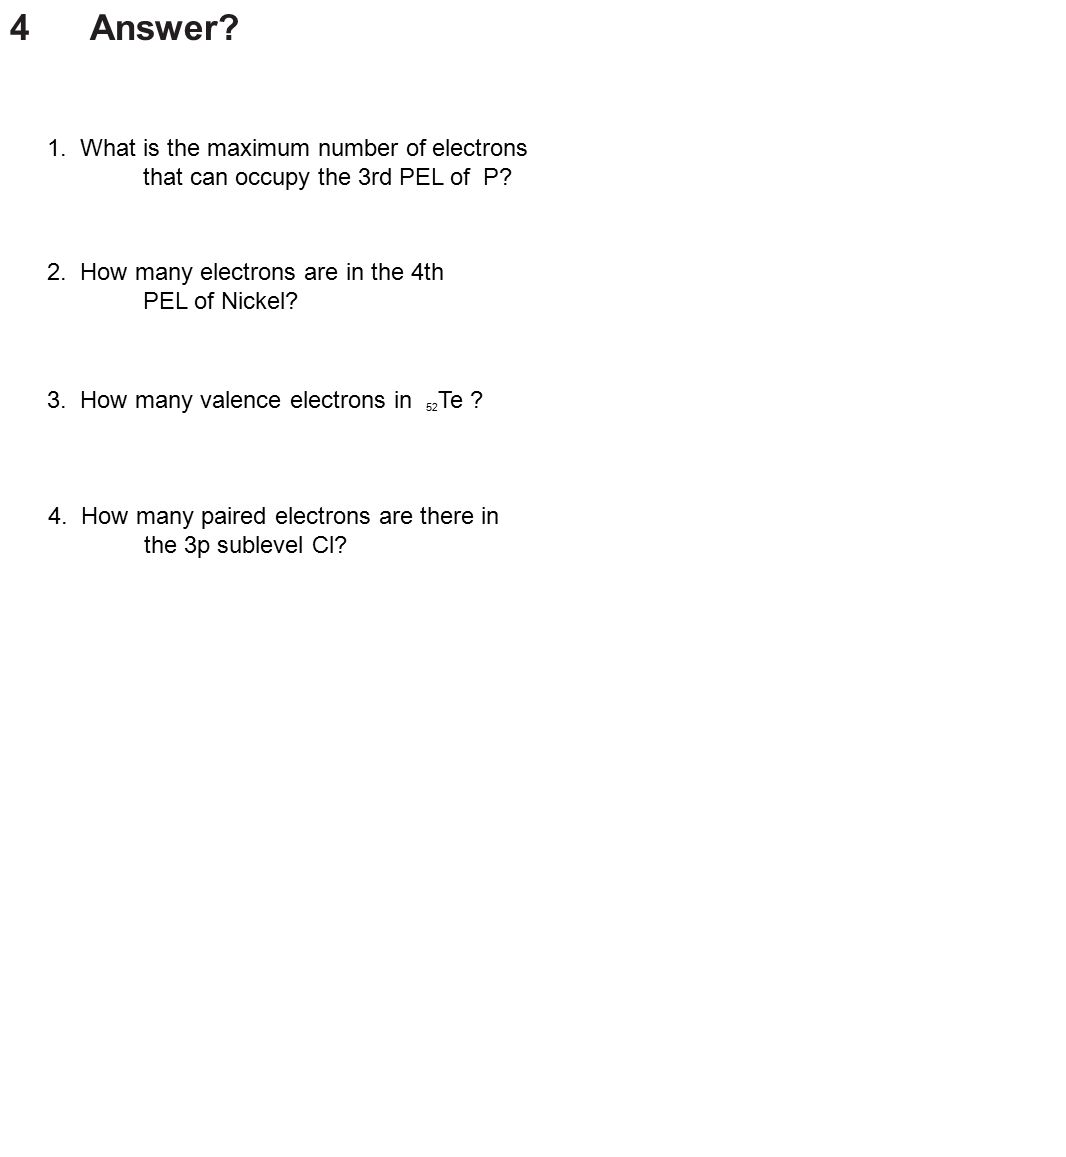 1. What is the maximum number of electrons that can occupy the 3rd PEL of P.